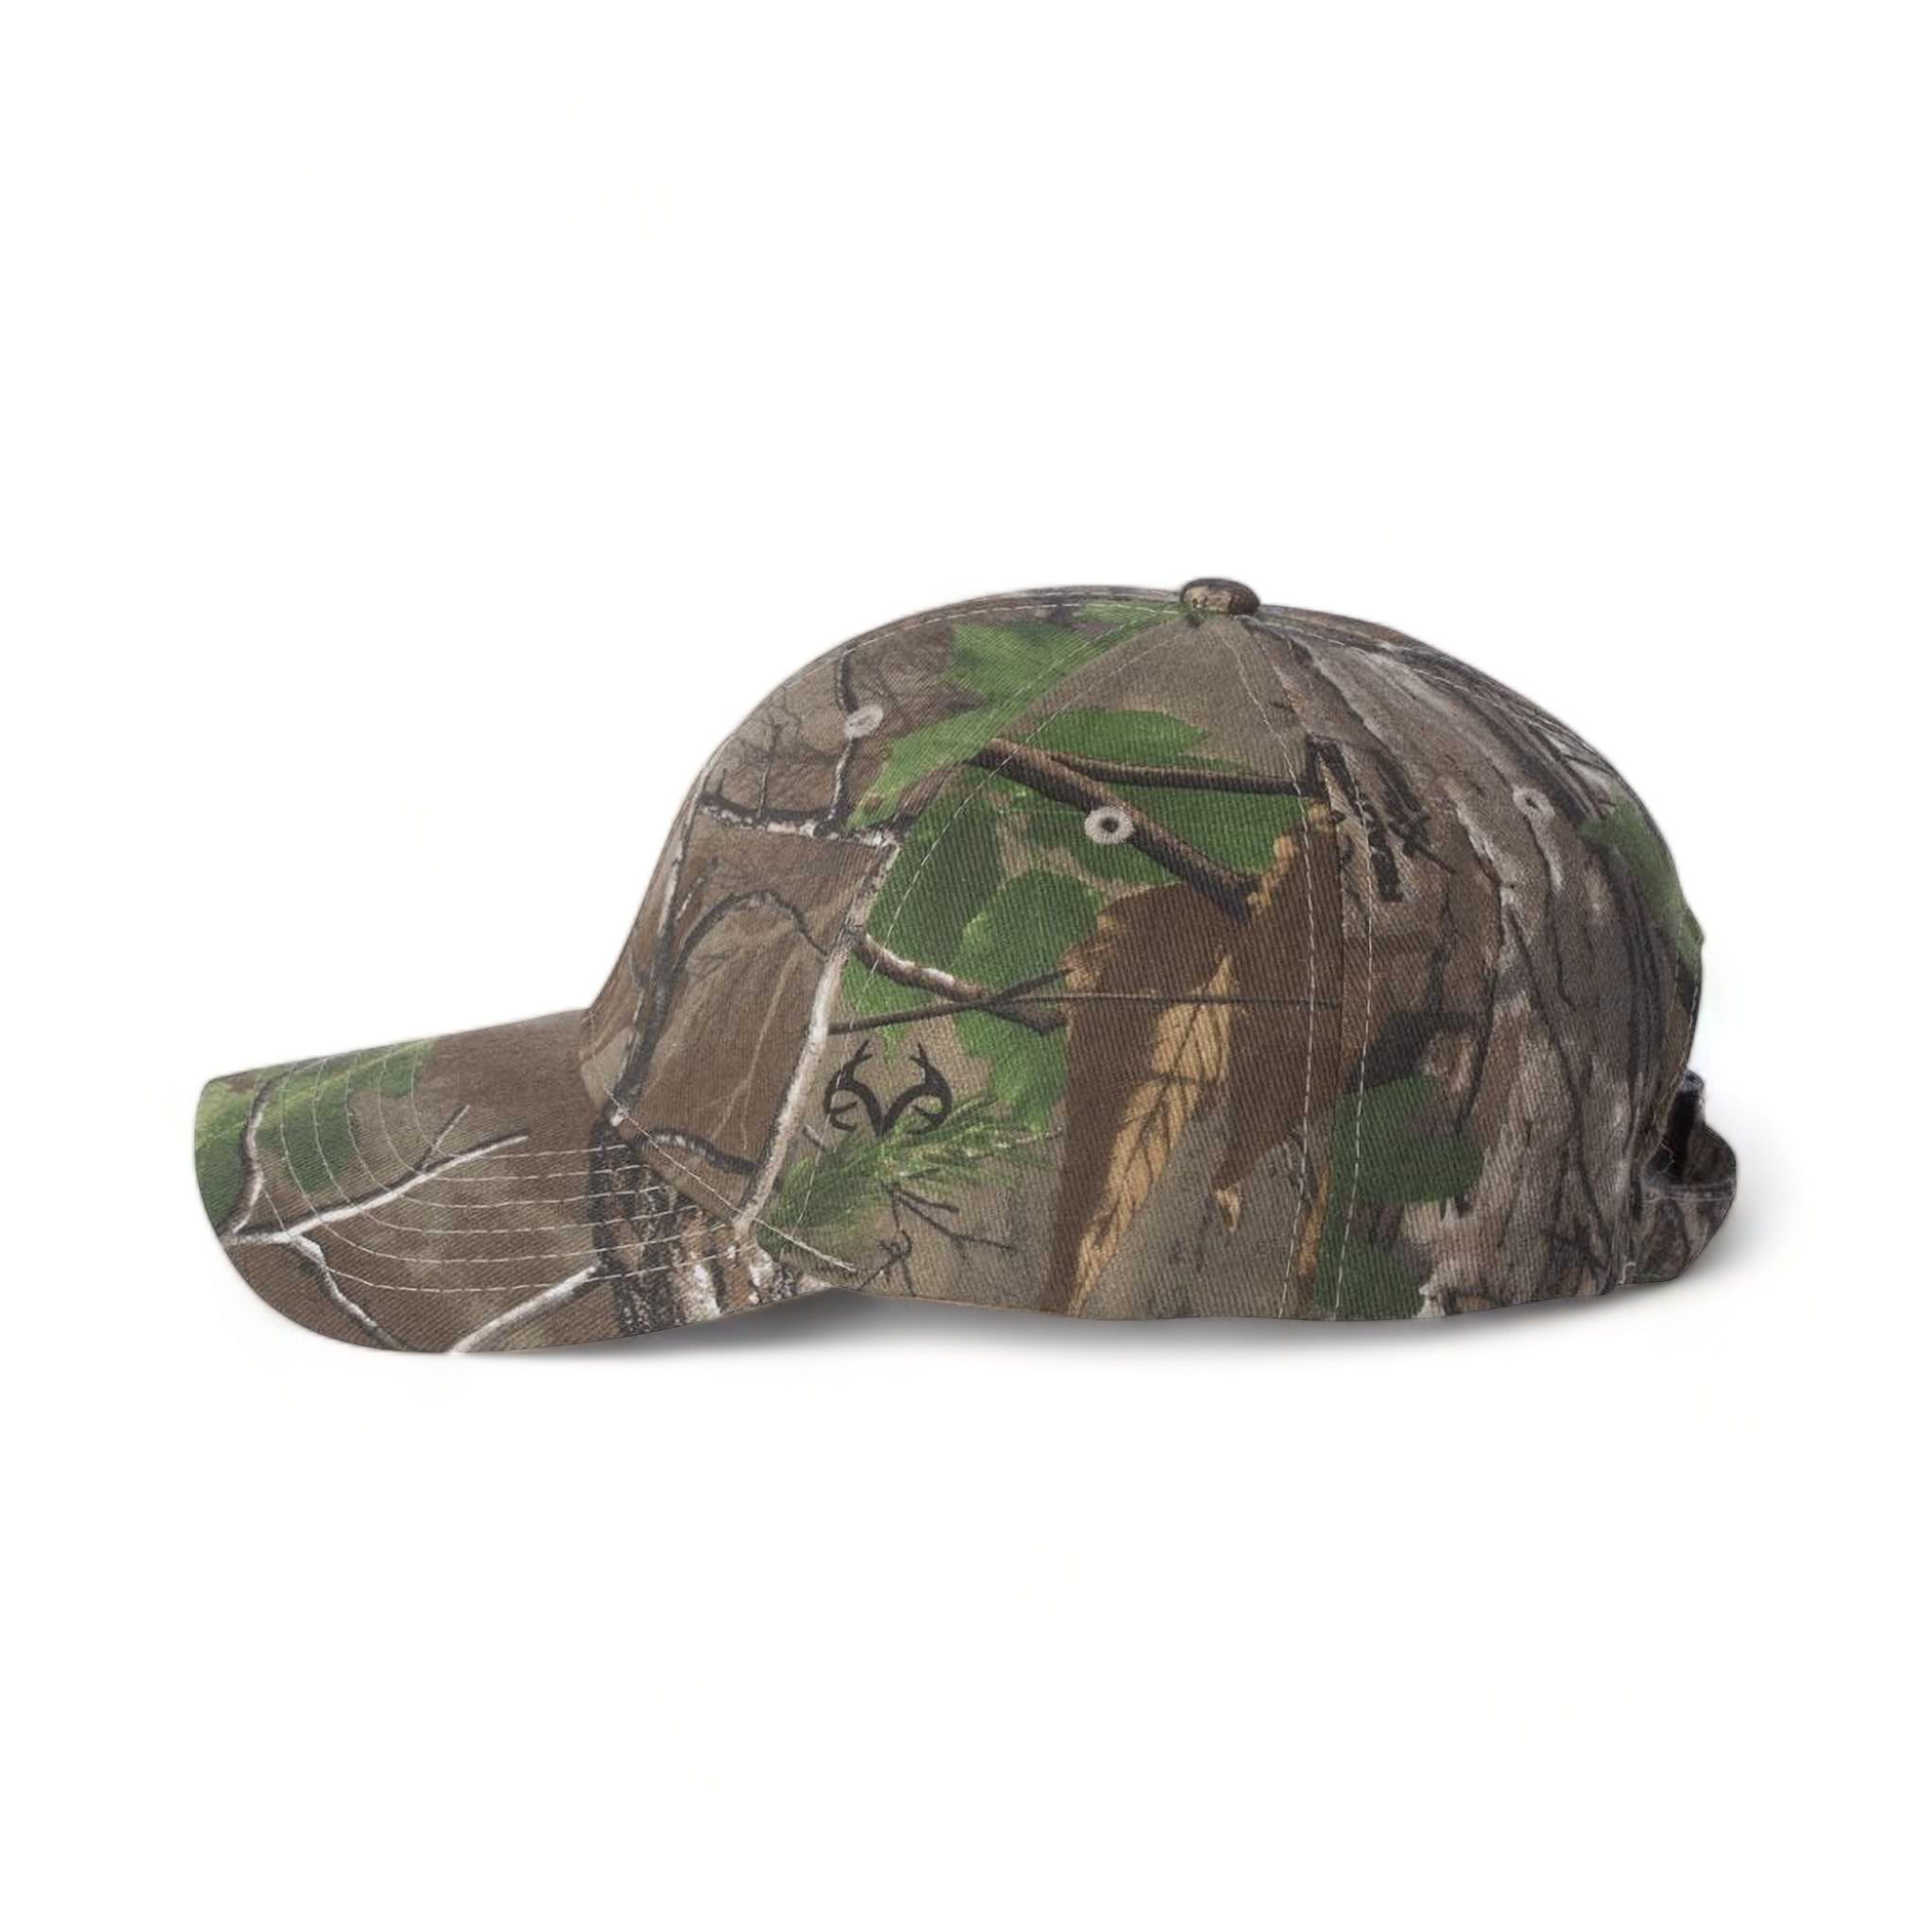 Side view of Kati LC10 custom hat in realtree xtra green